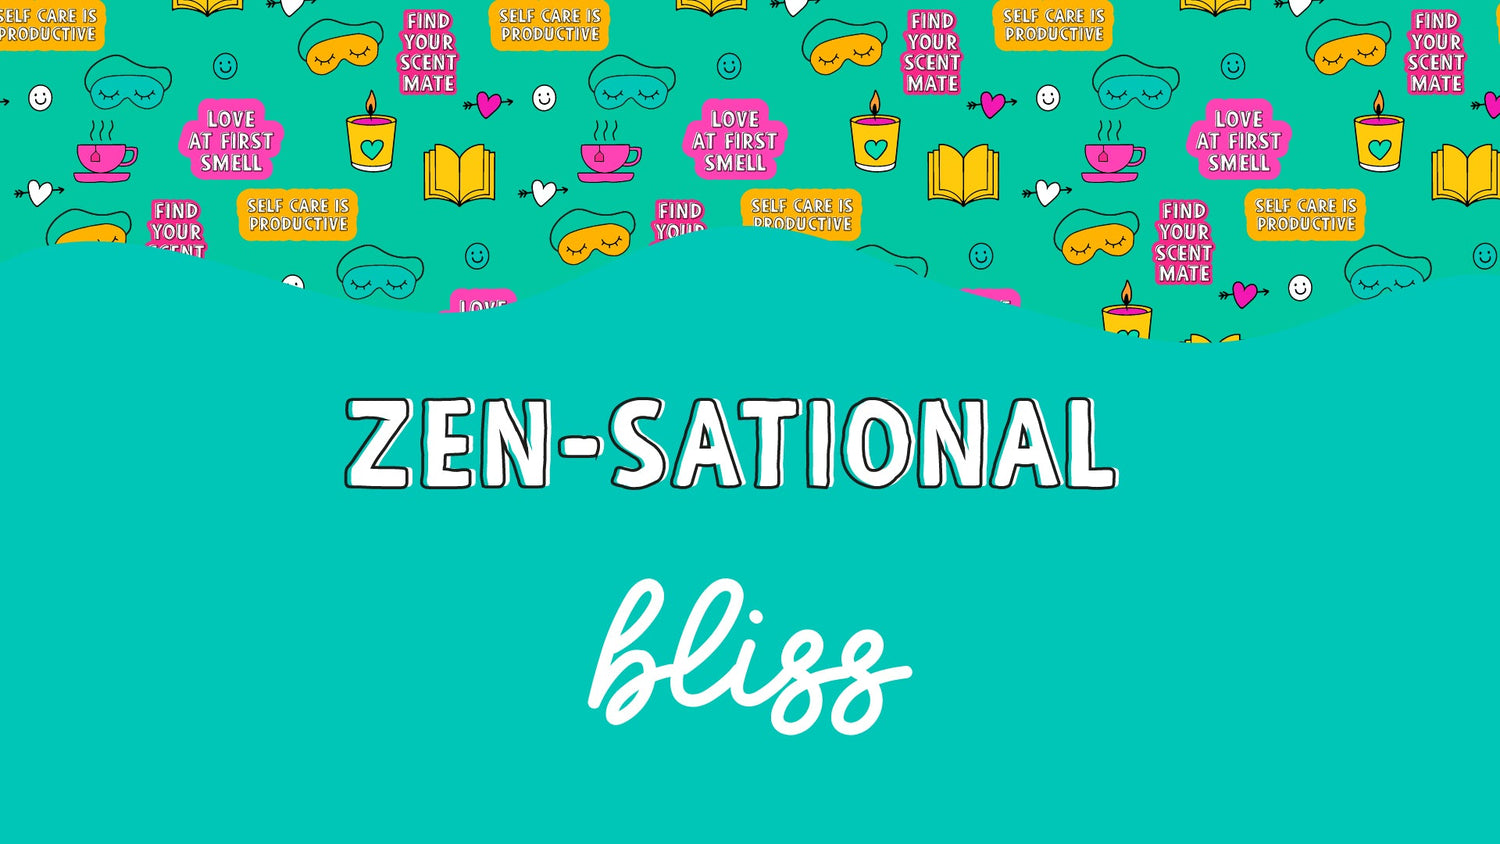 Experience the magic of sweet and spicy scents that melt your stress away. Zen-sational Bliss, where self-care meets pure indulgence